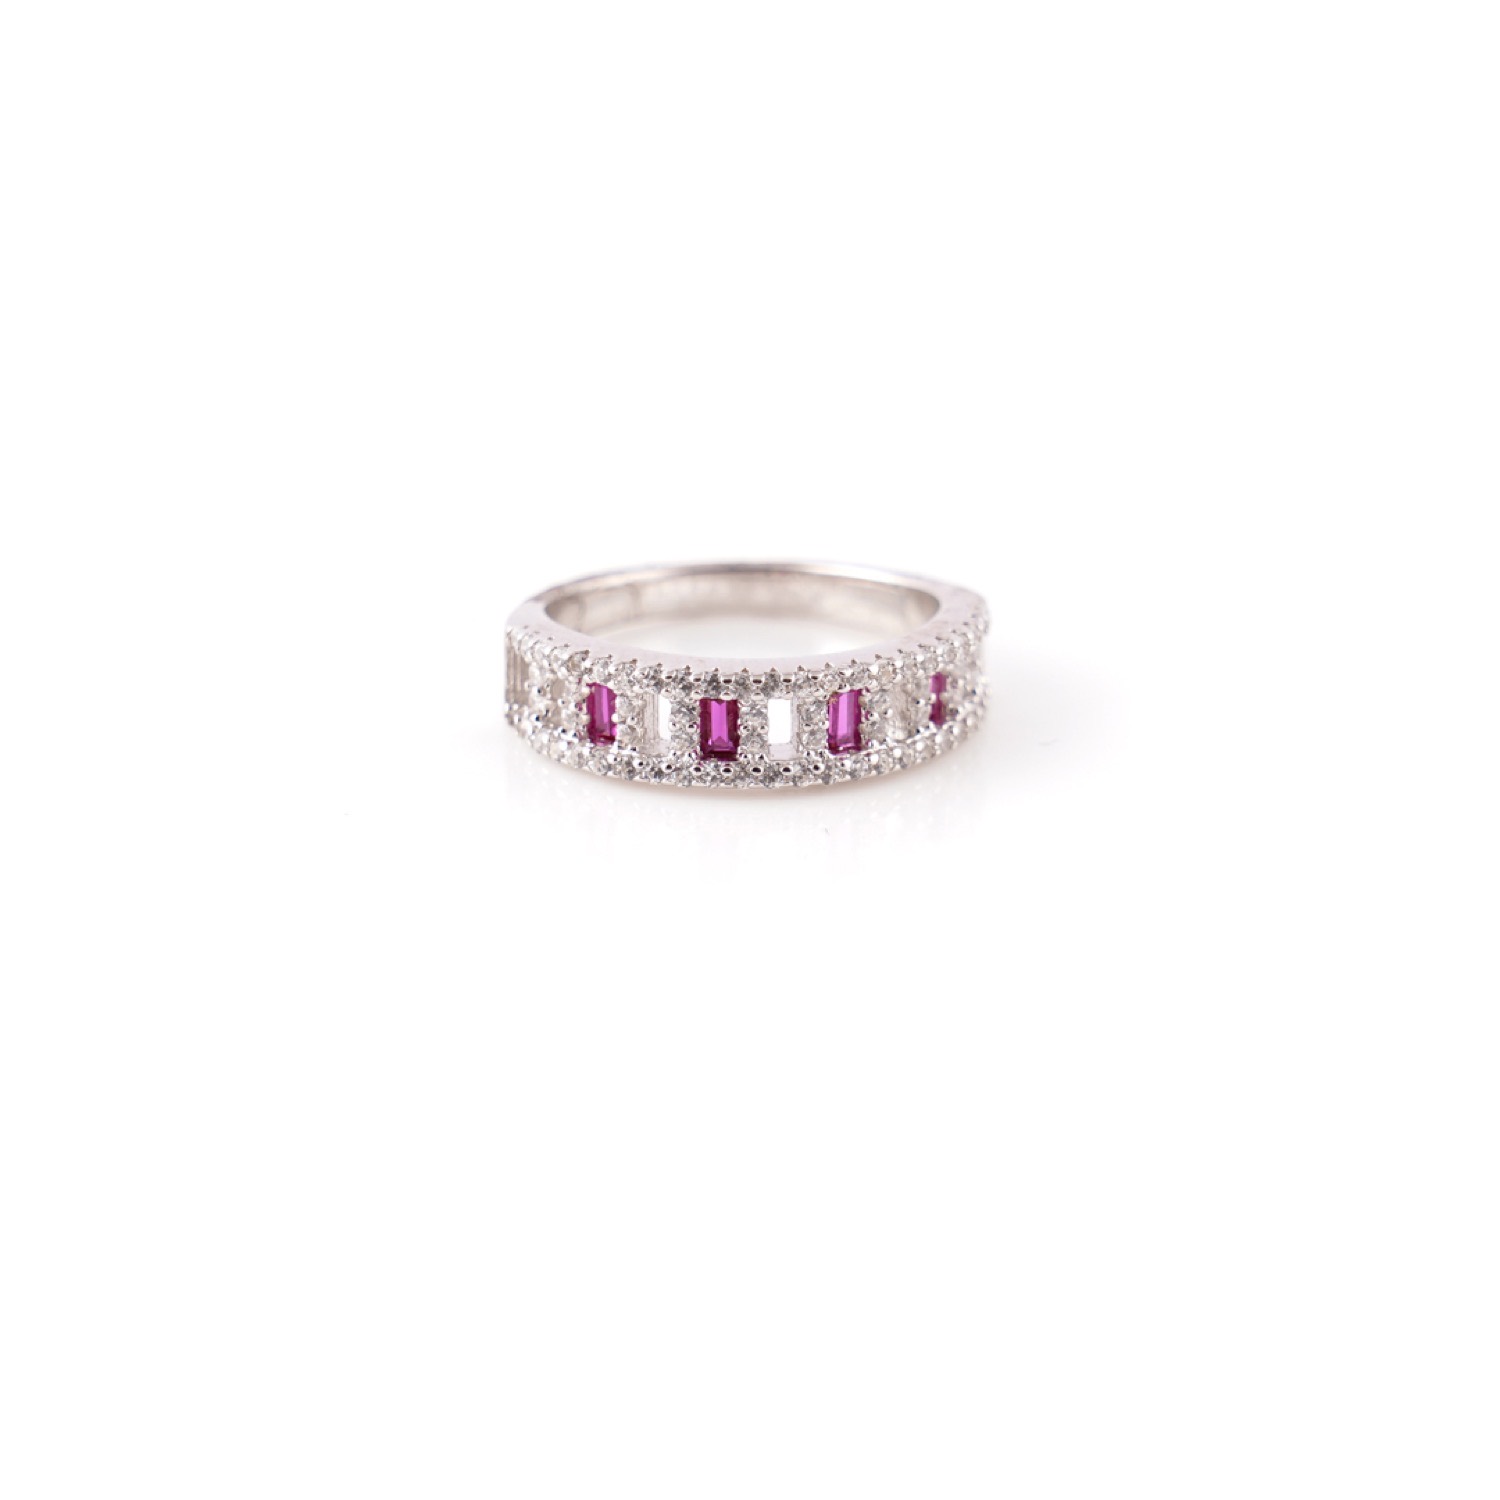 varam_rings_white_and_pink_stone_half_channeled_silver_ring-1